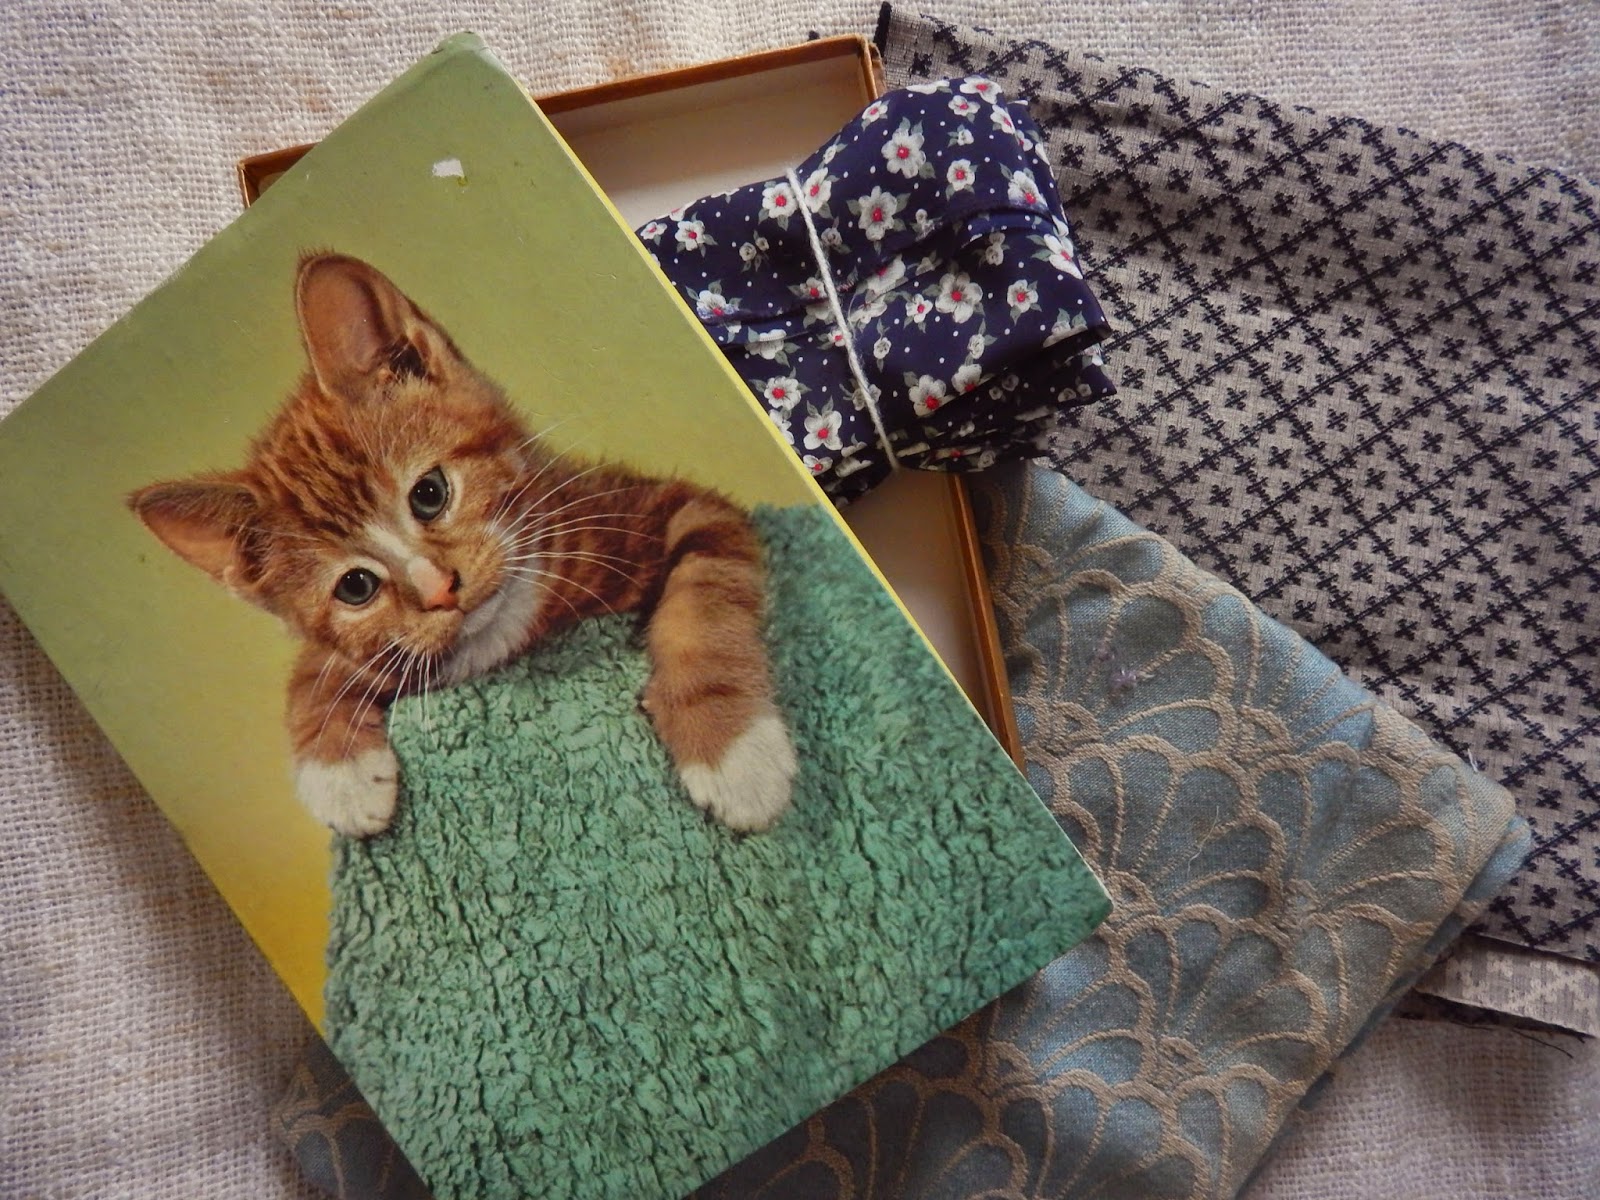 Vintage Cat Chocolate Box and fabric